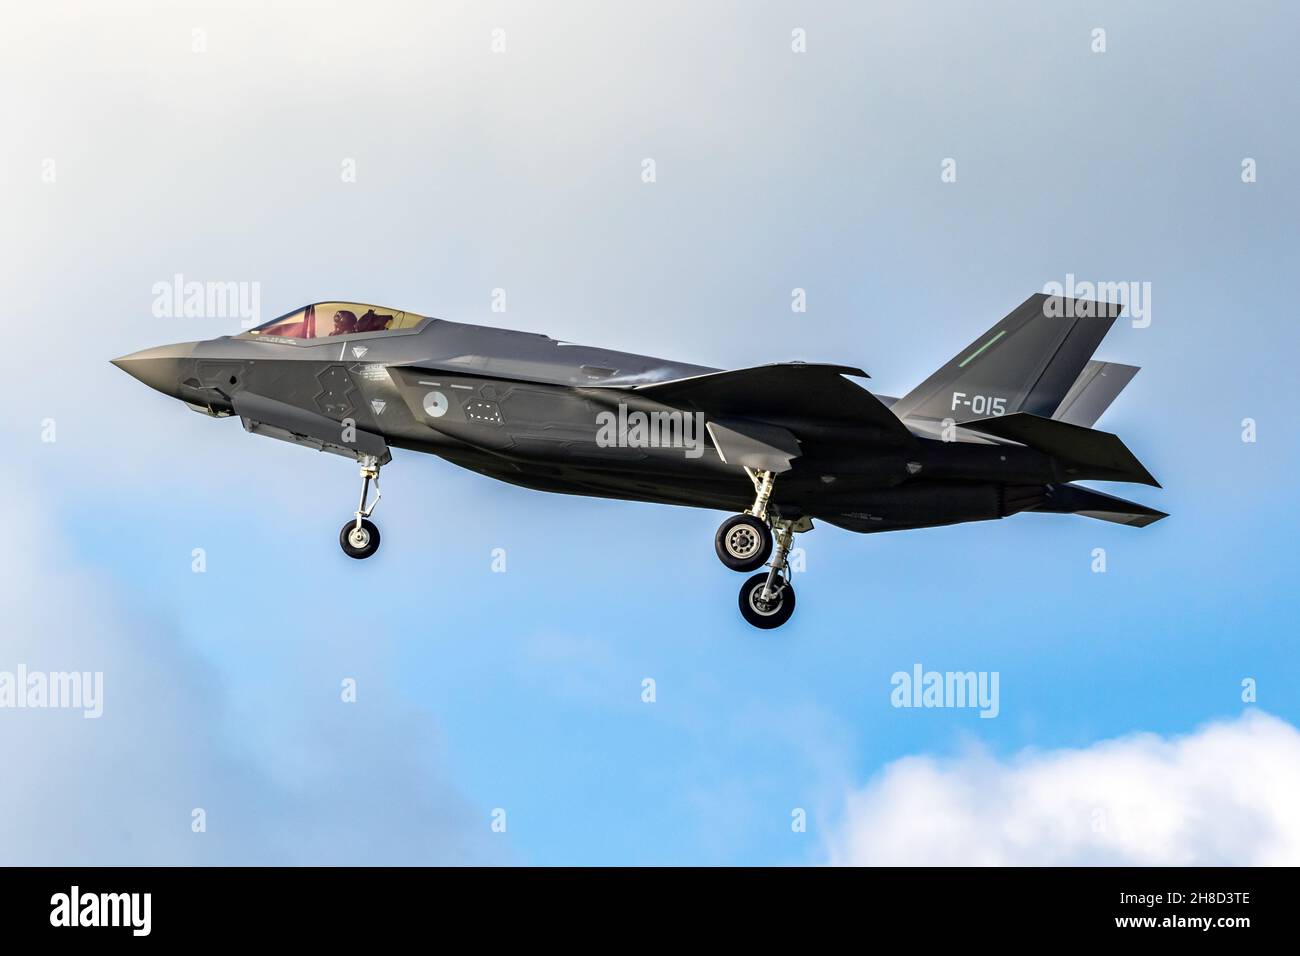 Lockheed Martin F-35 Lightning II stealth multirole combat aircraft from the Royal Netherlands Air Force arriving at Leeuwarden Air Base. October 7, 2 Stock Photo